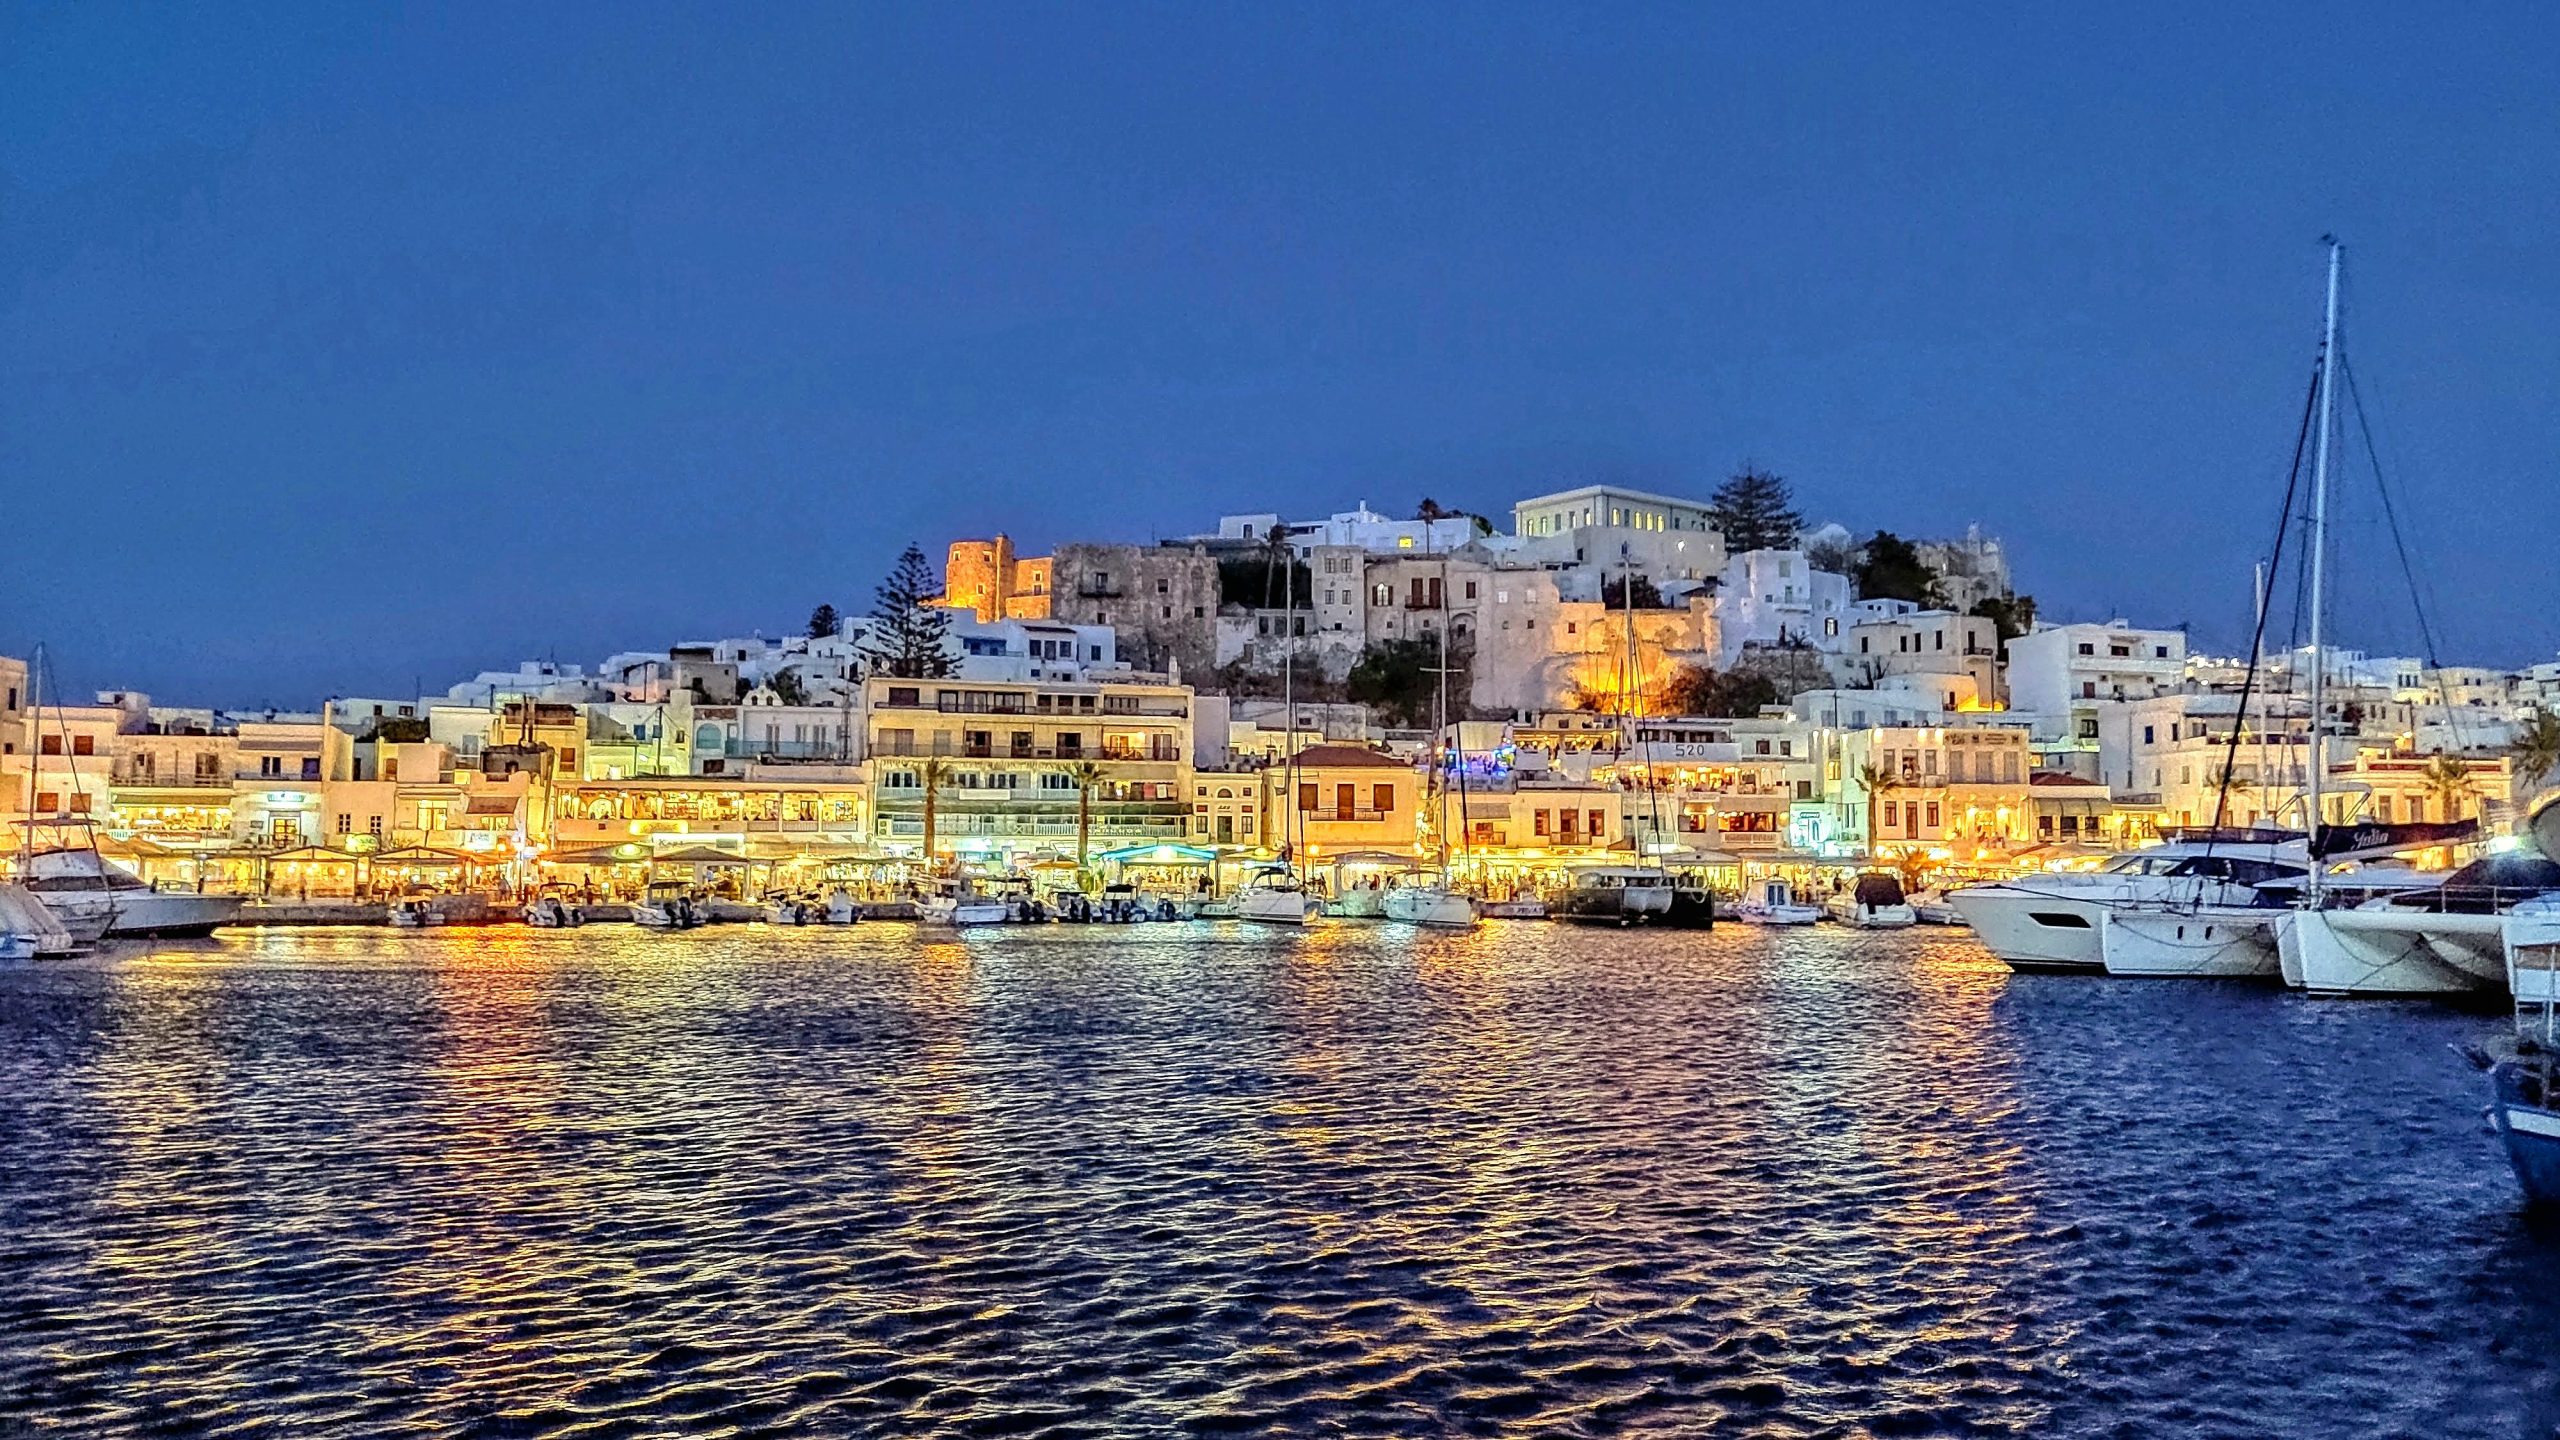 discover the enchanting beauty and rich history of the cyclades islands with our travel guide. plan your dream vacation to these stunning greek islands.